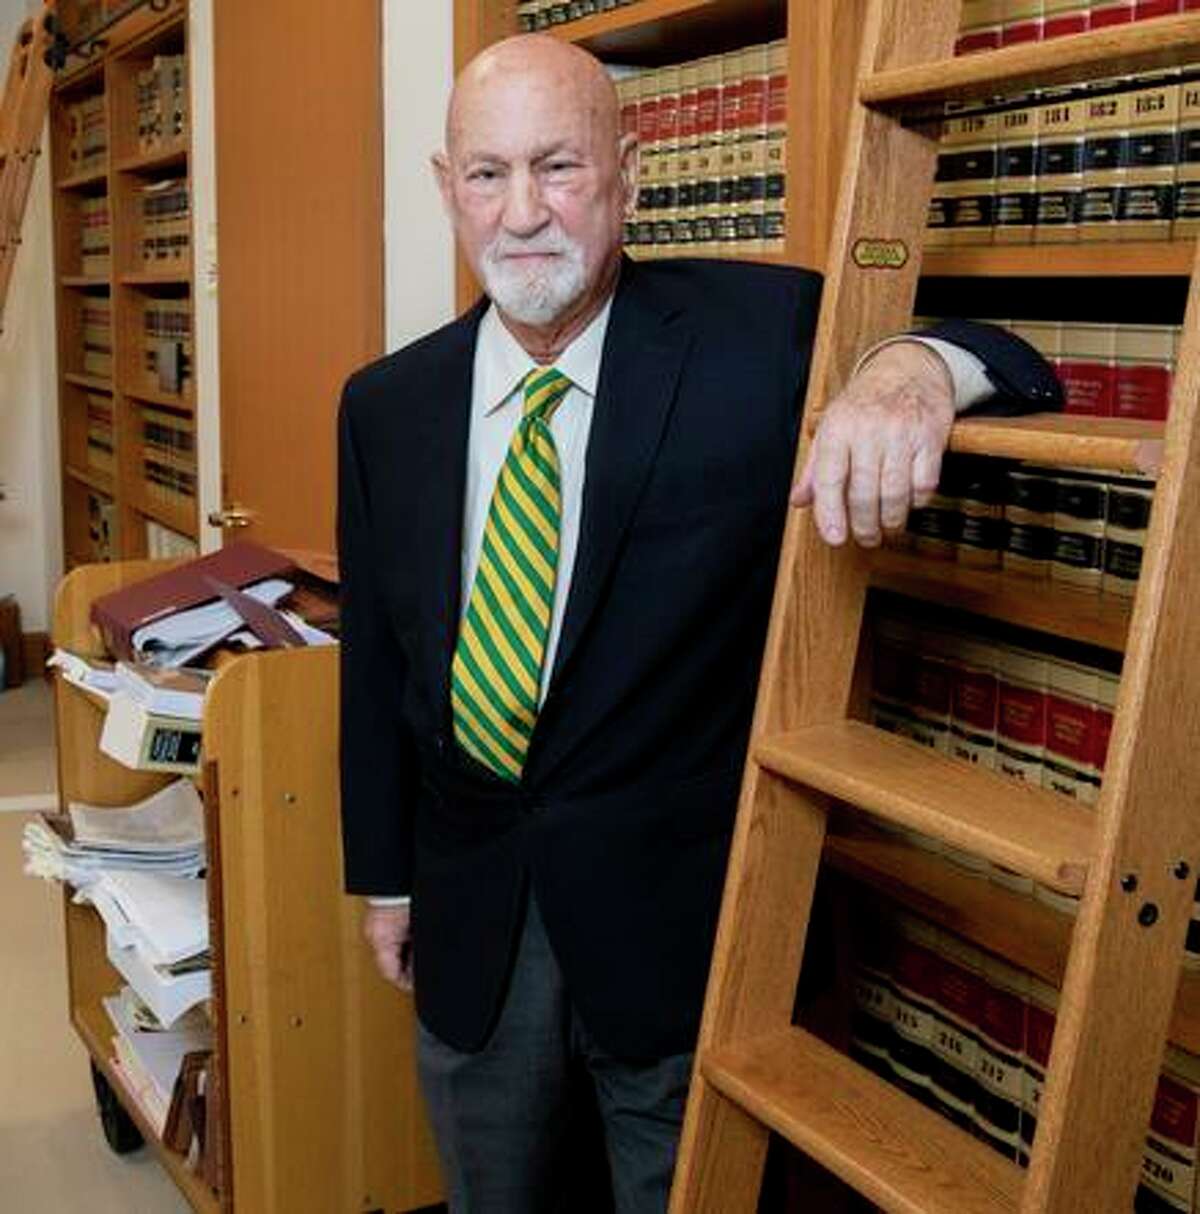 J. Anthony Kline is retiring after key decisions on bail, same-sex marriage and guns.